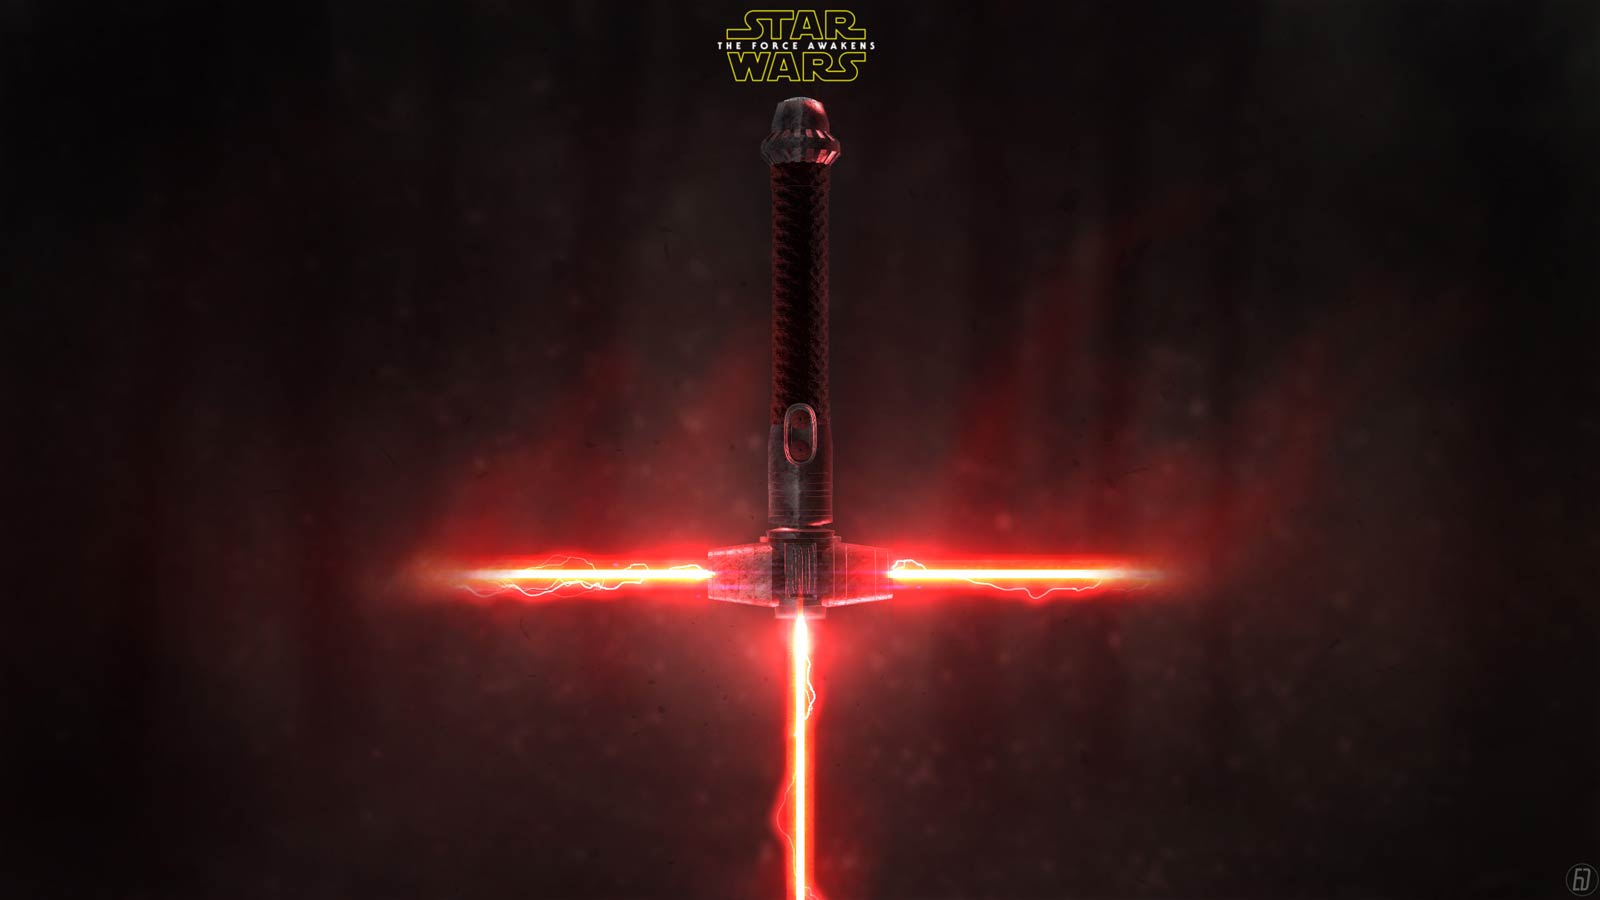 Star Wars 7 The Force Awakens Movie HD Wallpapers | Computer ...